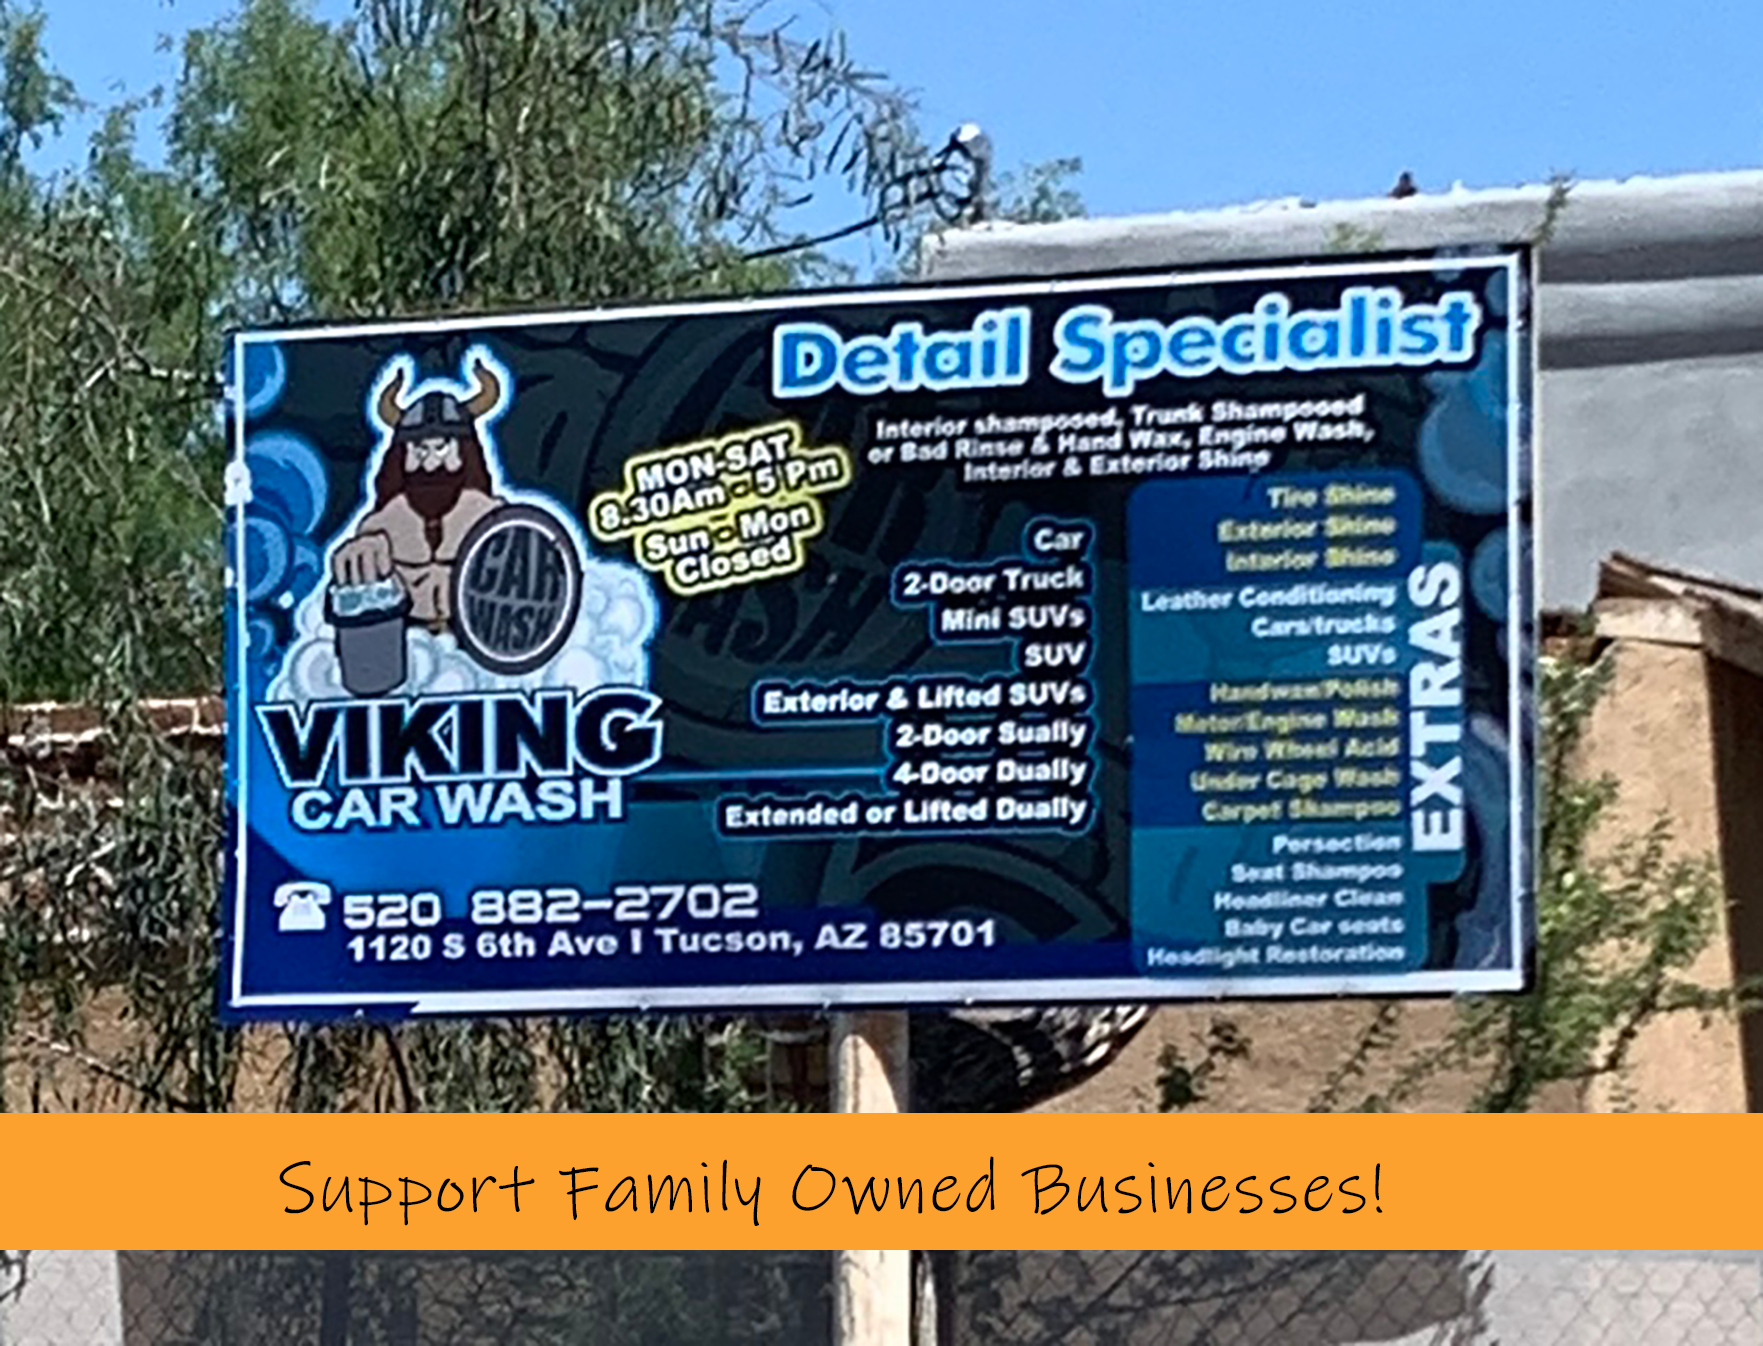 TJs Paint Parties_Viking Car Wash_Family Owned Businesses.png